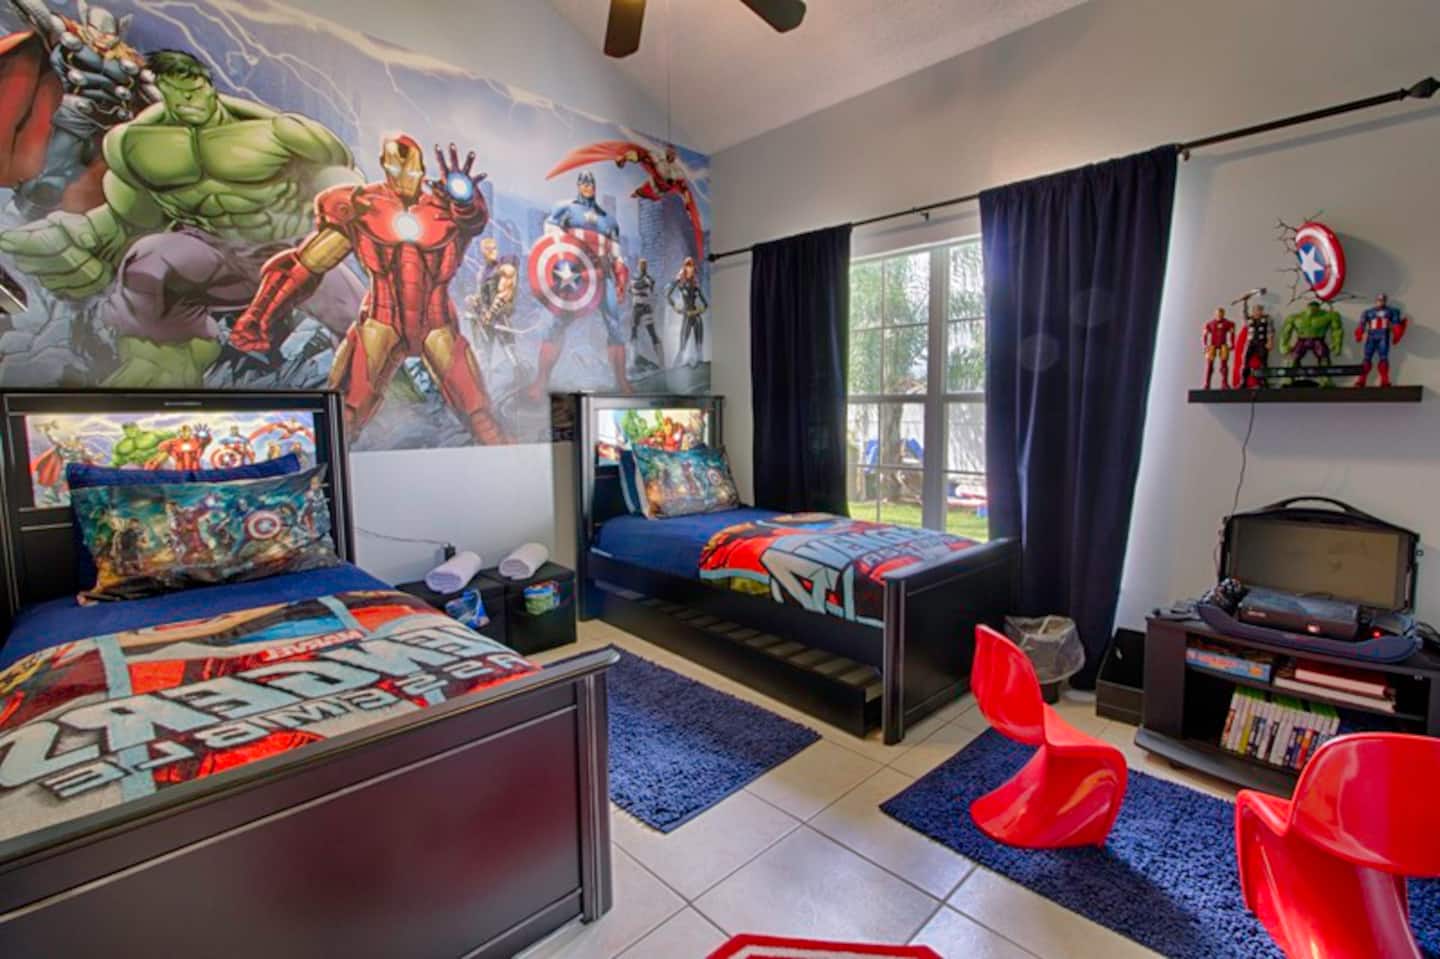 R U Incredible Themed House, one of the best Airbnbs in Florida